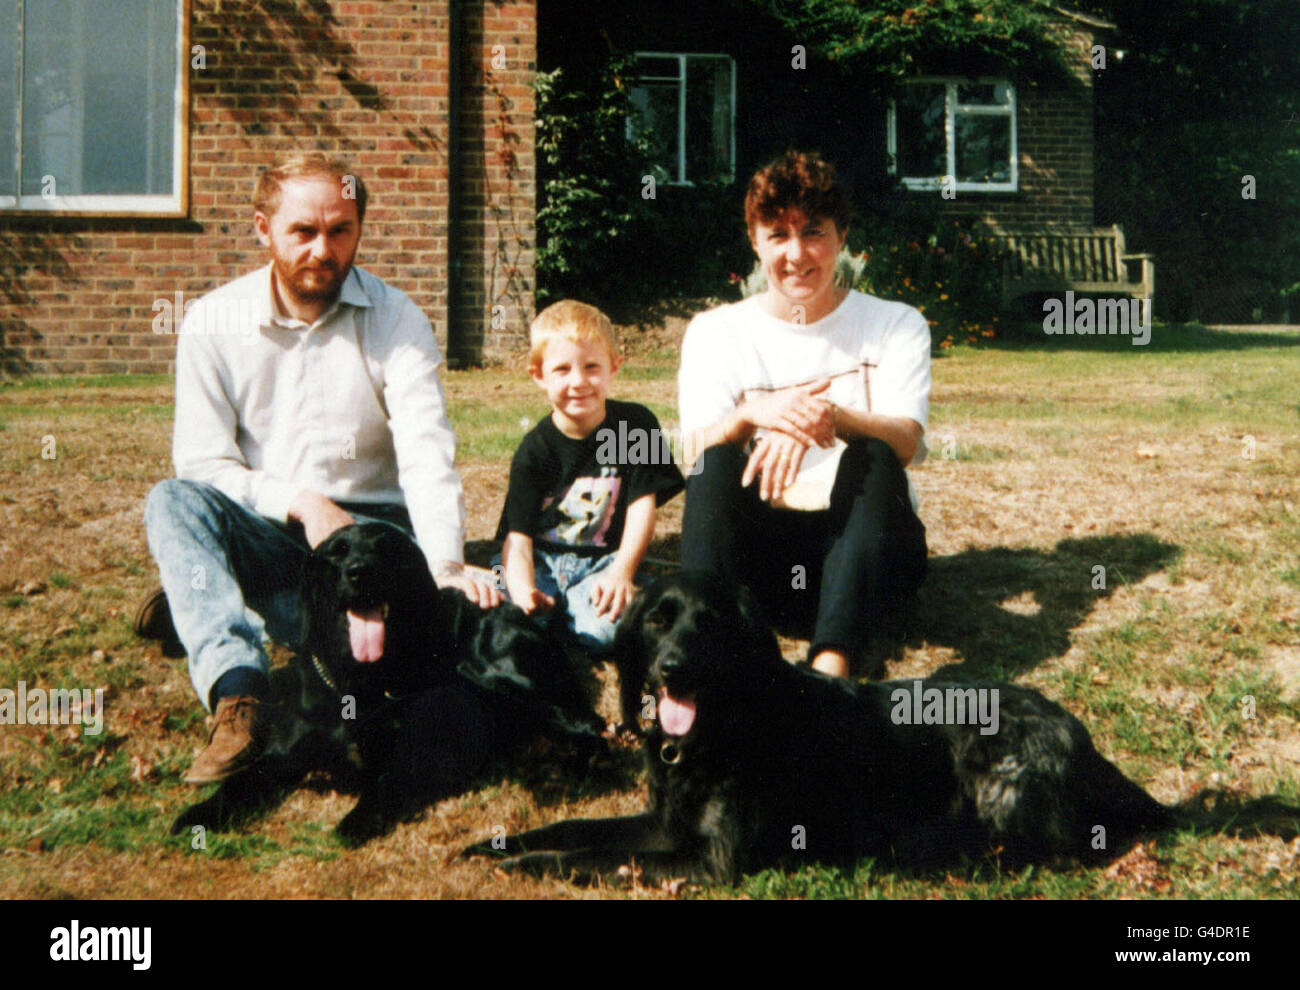 Carol and John Marshall, with their son Thomas, taken at a friends home in 1991. On Monday (17 August) Mr and Mrs Marshall, made a desperate plea for the person harbouring their son's killer to contact the police. The body of 12-year-old Thomas was found dumped in a wooded picnic area 50 miles from his home in Happisburgh, Norfolk, on August 22nd last year - he had been strangled. PA Photos. See PA story POLICE Marshall Stock Photo